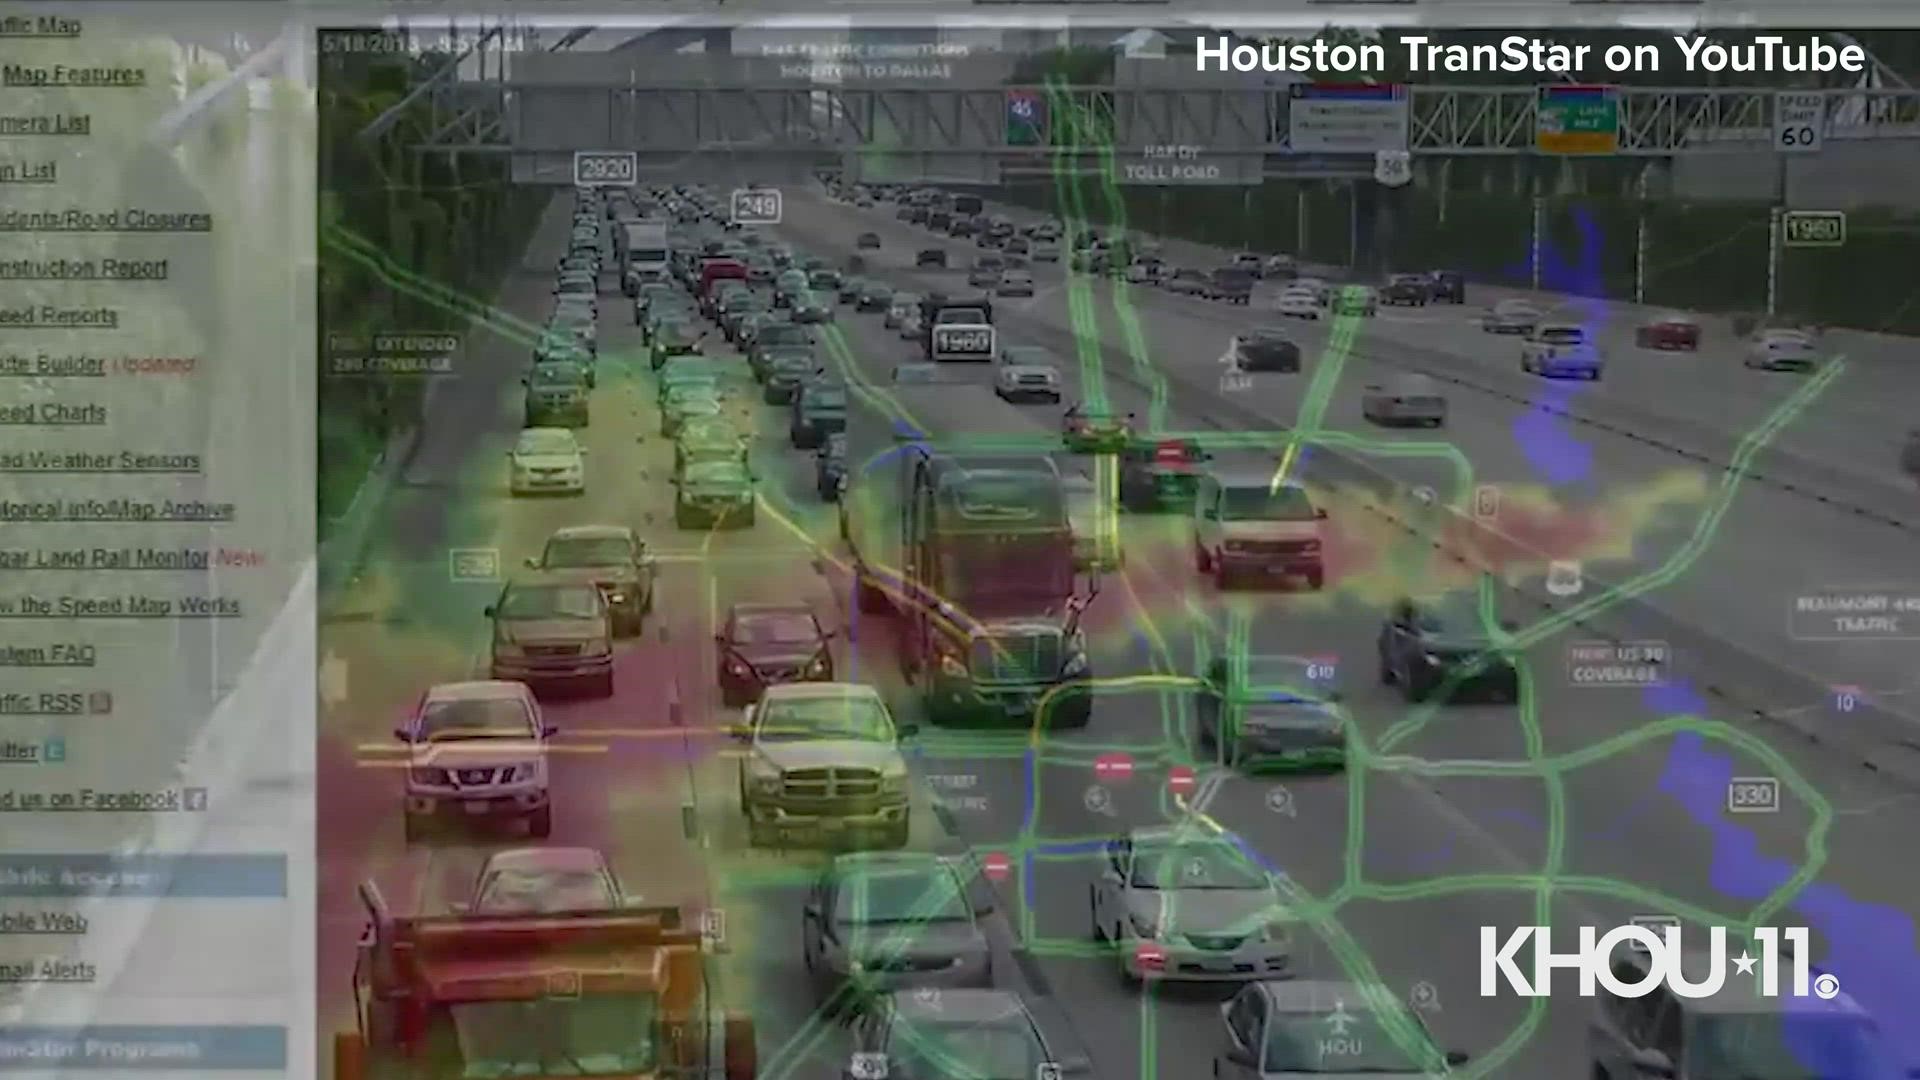 This video from Houston TranStar explains what the agency does to keep Houstonians safe during their travels across the city and the region.